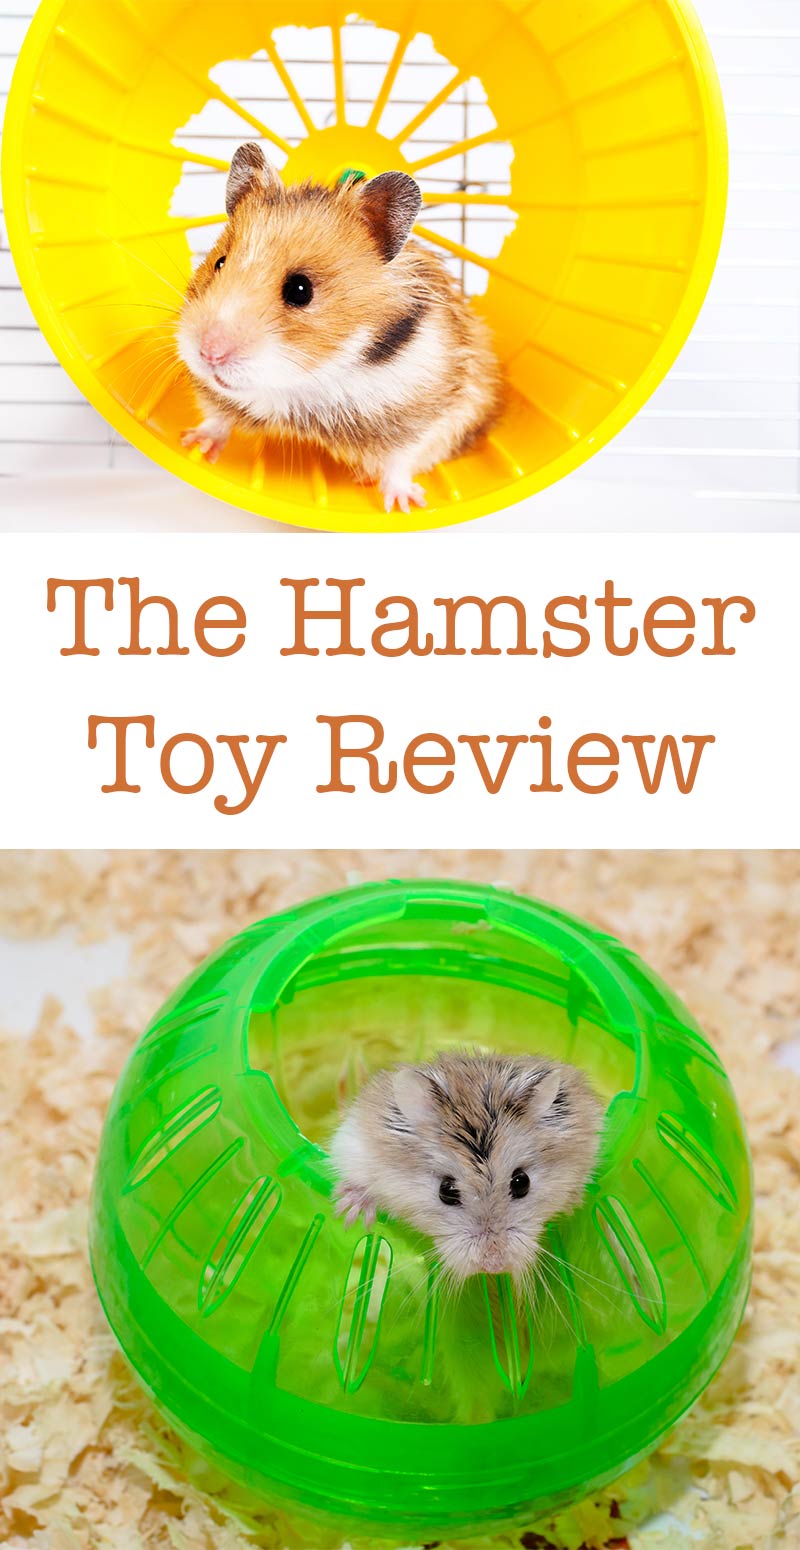 The Big Hamster Toy Review - The Best Toys For Hamsters